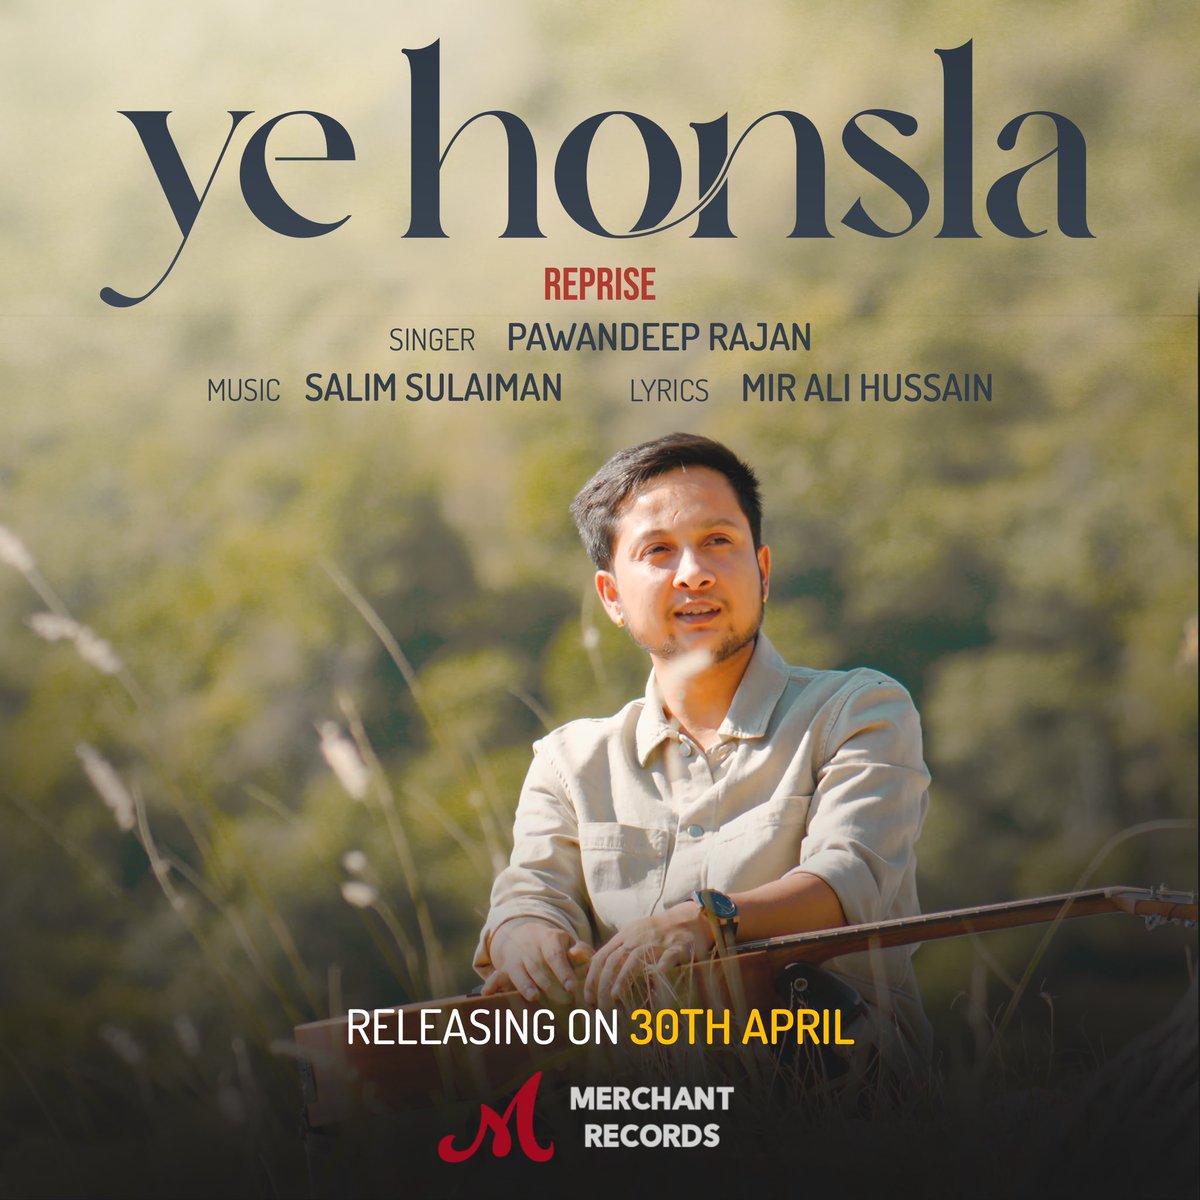 🎶Feel the soul-stirring magic of 'Yeh Honsla' as @pawandeeprajan9 heartfelt rendition fills the air. Join us April 30th on our YouTube channel for a journey of love and resilience.

#YeHonsla #SalimSulaiman #MerchantRecords